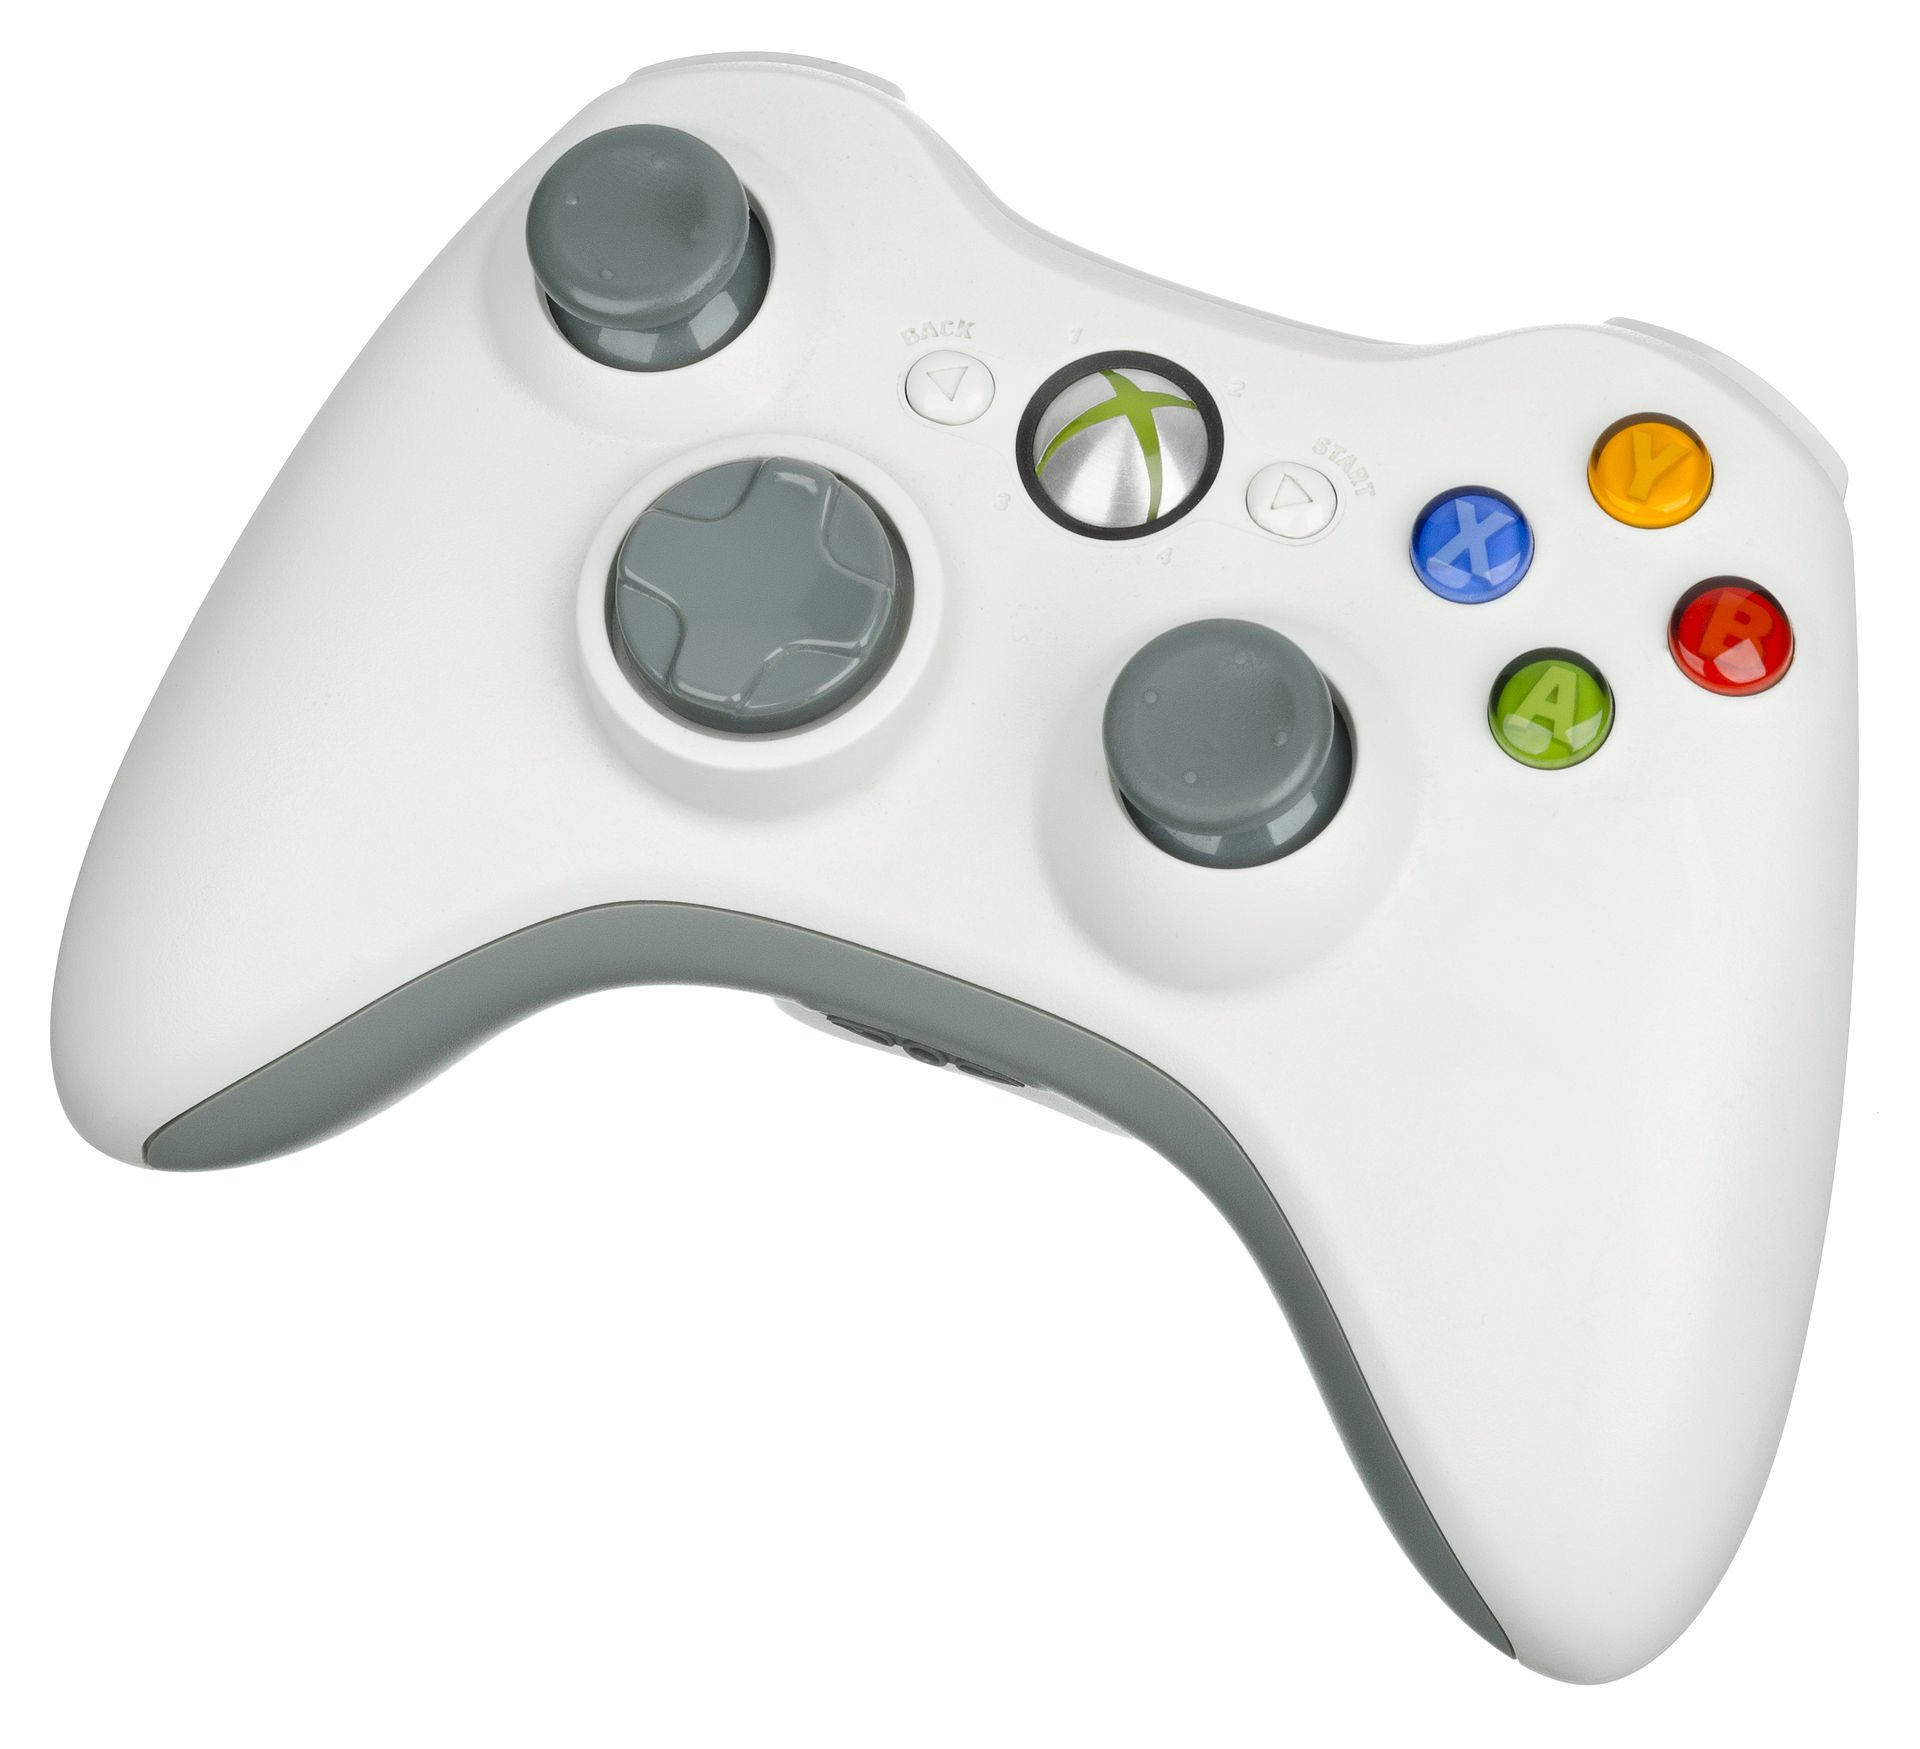 Fietstaxi Onophoudelijk Karakteriseren The company that revived the Xbox 'Duke' is now bringing back the Xbox 360  controller | VGC